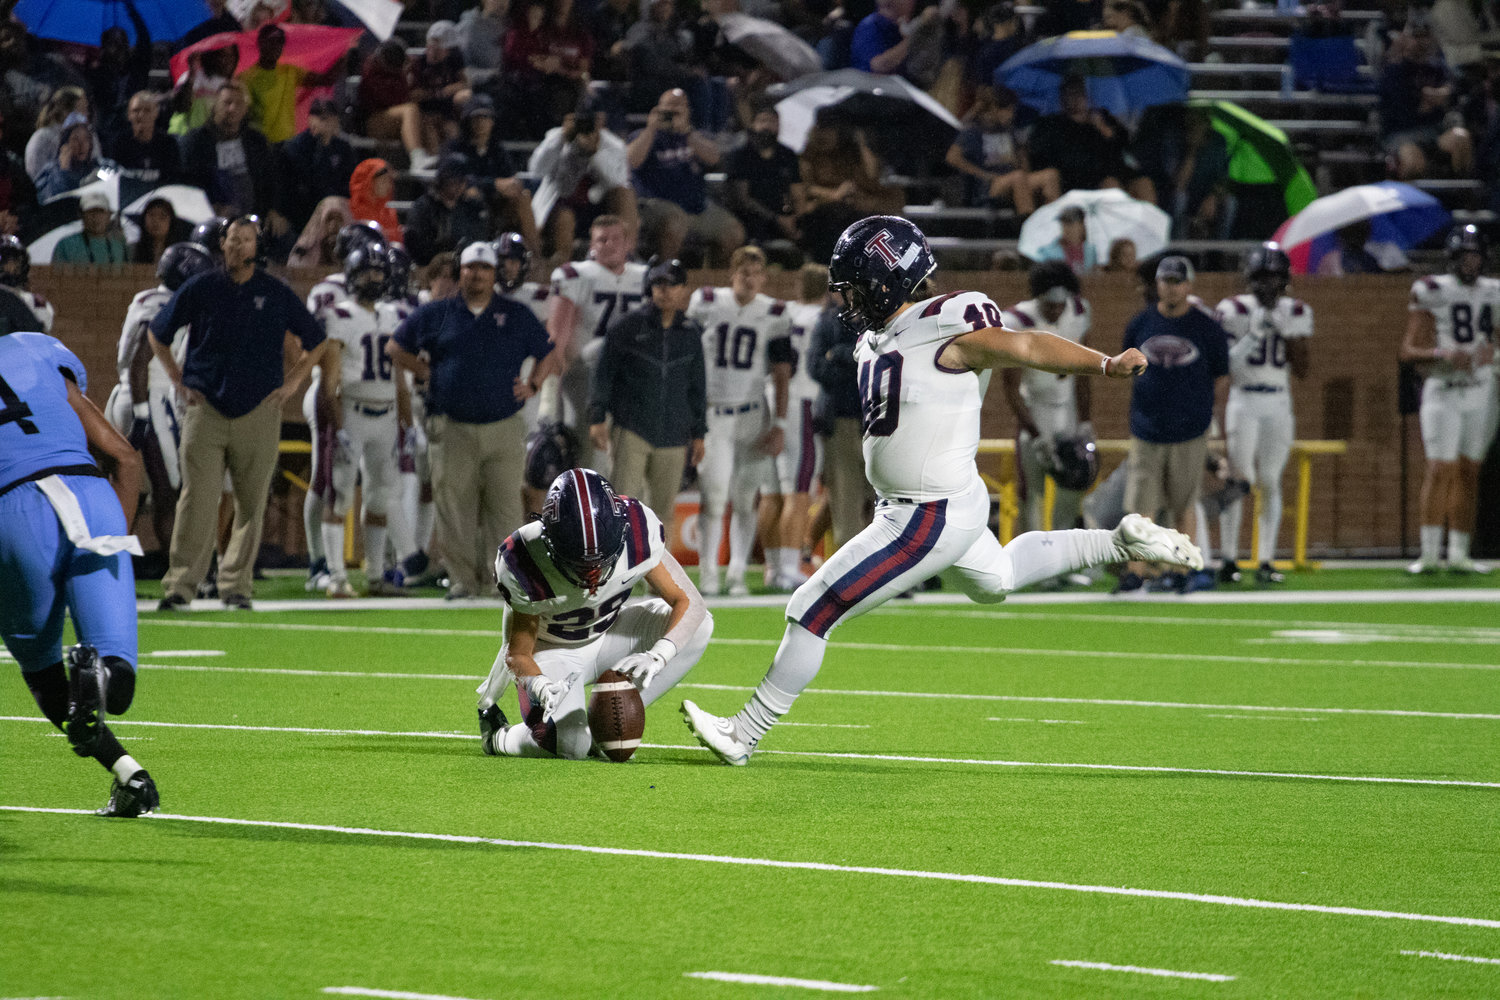 Tompkins' Andrew Horner kicks an extra point during Friday's game between Tompkins and Paetow at Rhodes Stadium.